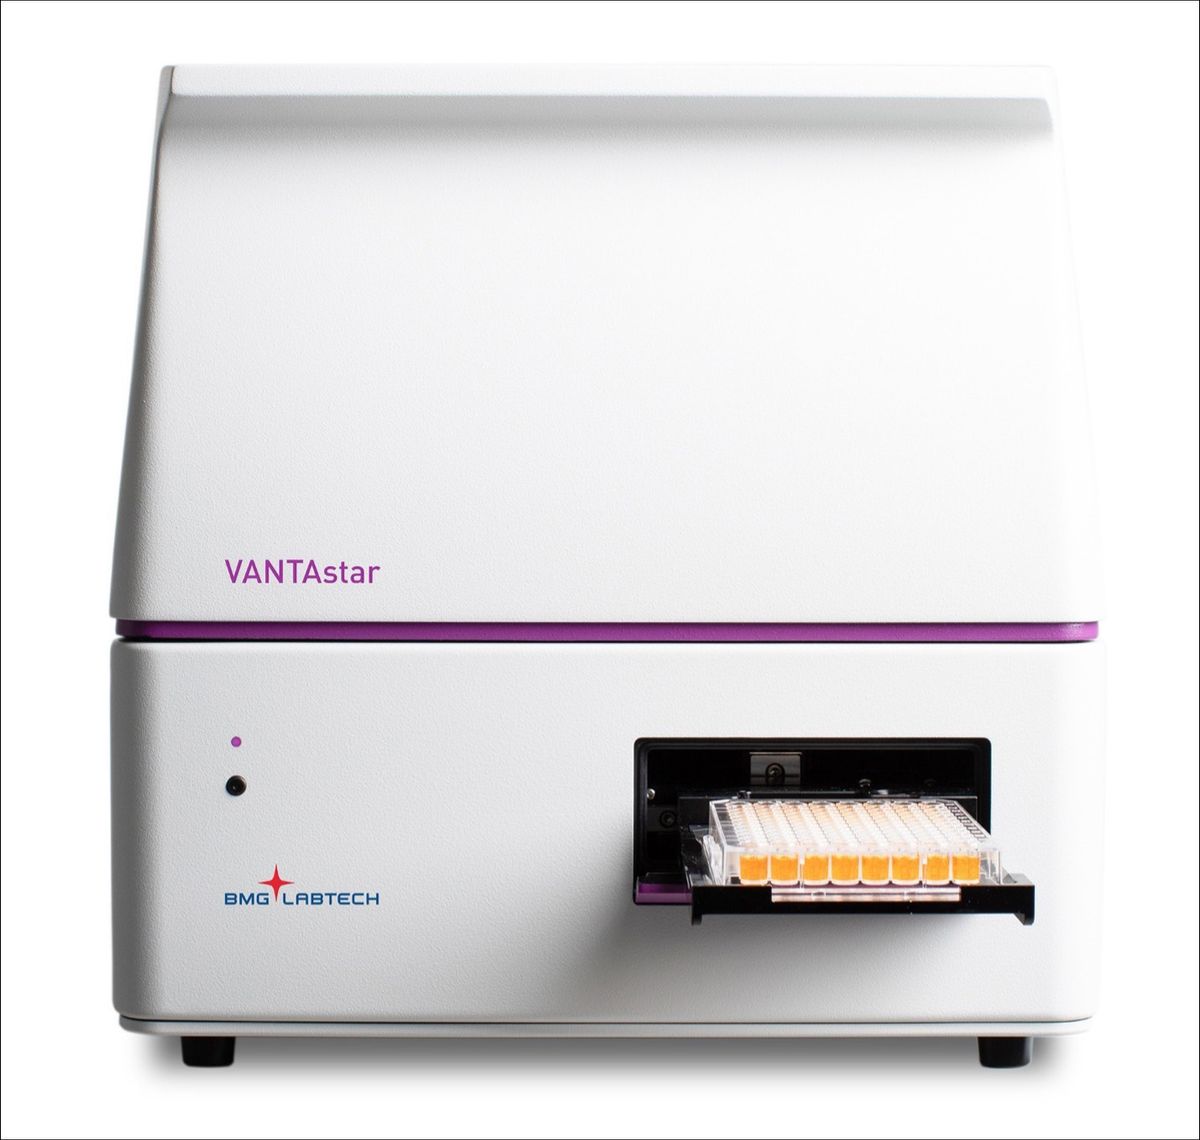 A photo of the VANTAstar® ejecting a microplate containing samples.